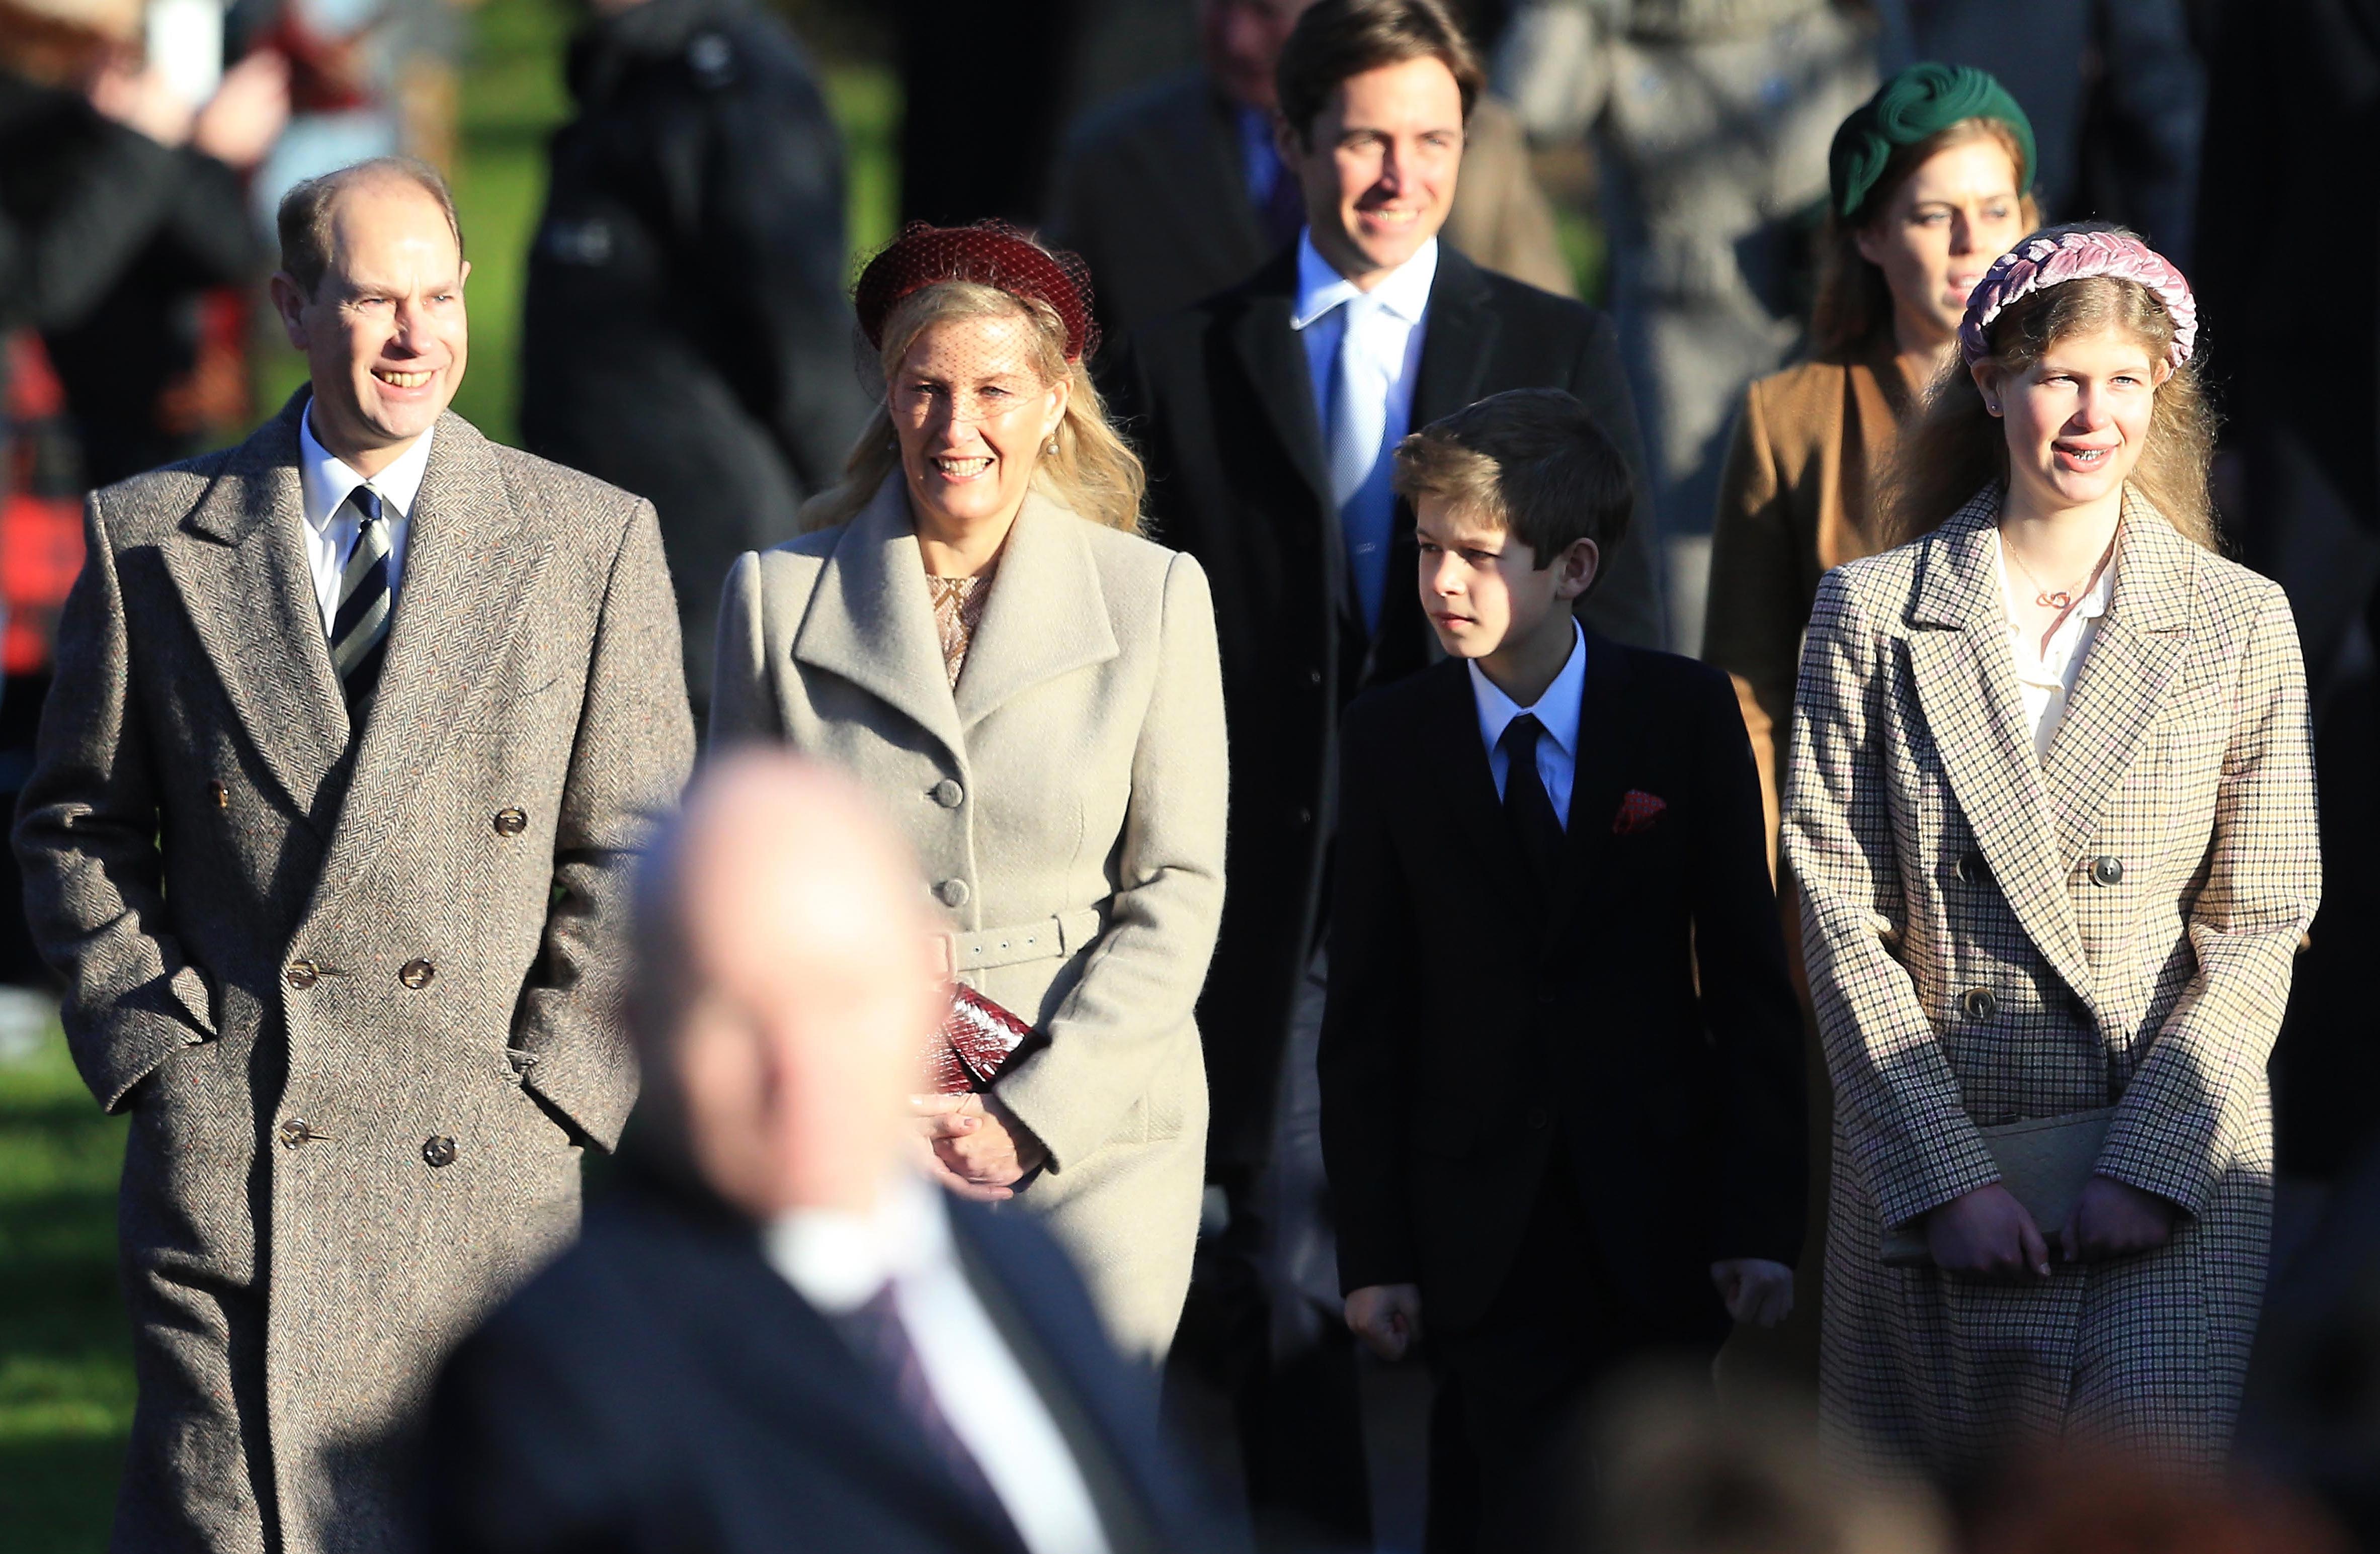 Prince Edward, Earl of Wessex, Sophie, Countess of Wessex, Lady Louise Windsor and James, Viscount Severn attend the Christmas Day Church service at Church of St Mary Magdalene on the Sandringham estate on December 25, 2019 in King's Lynn, United Kingdom. (Stephen Pond—Getty Images)